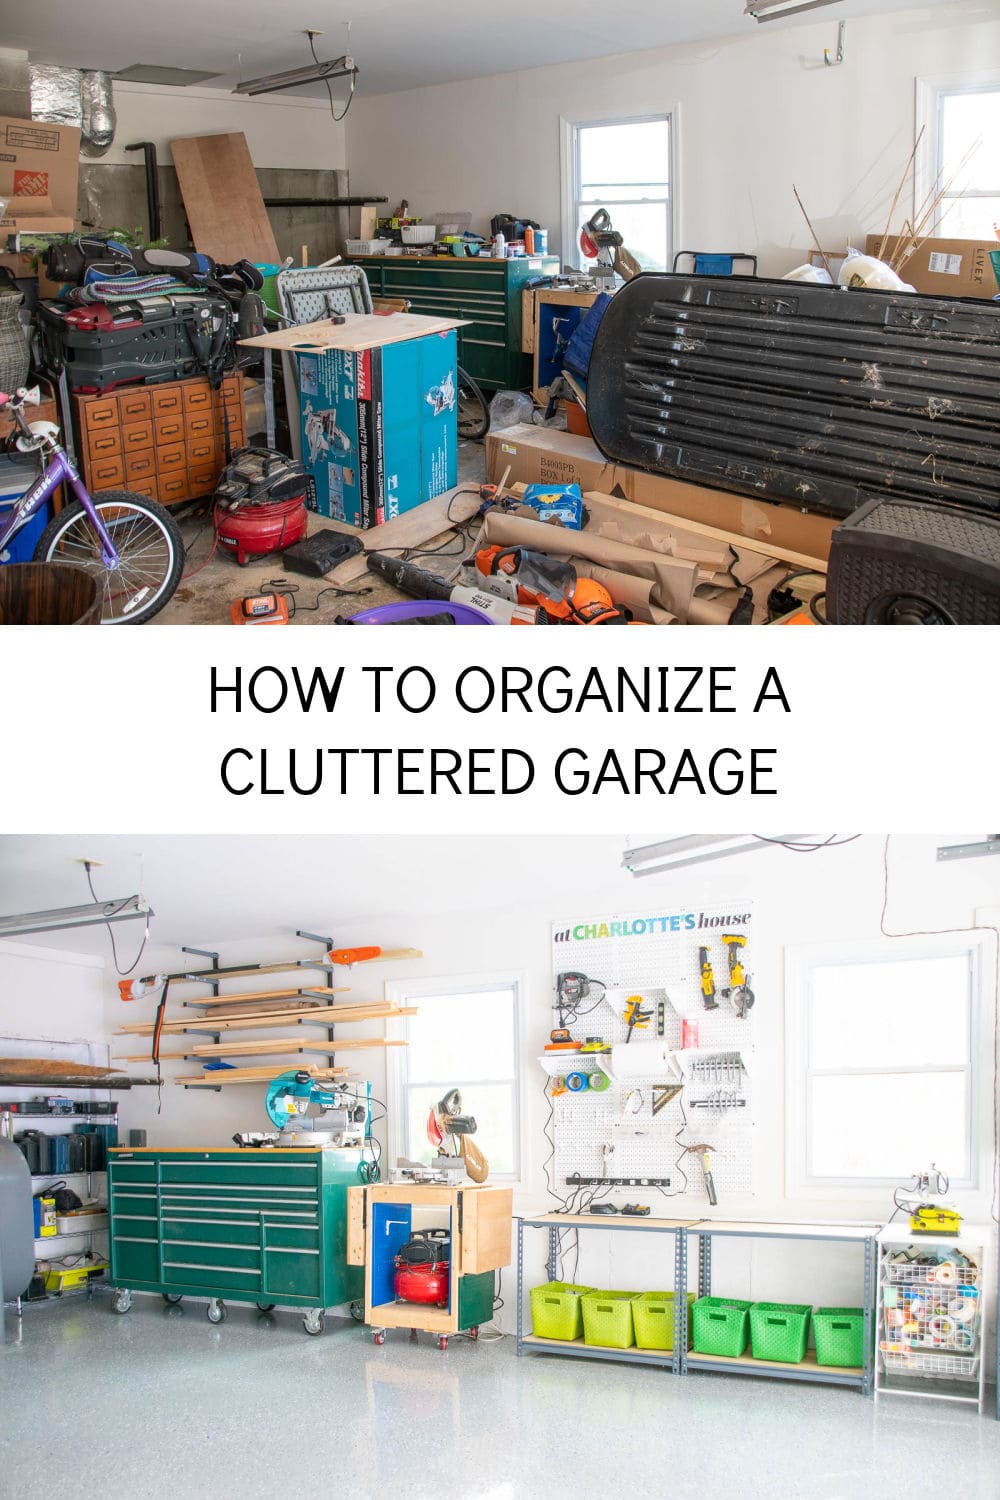 HOW TO ORGANIZED A CLUTTERED GARAGE - At Charlotte's House